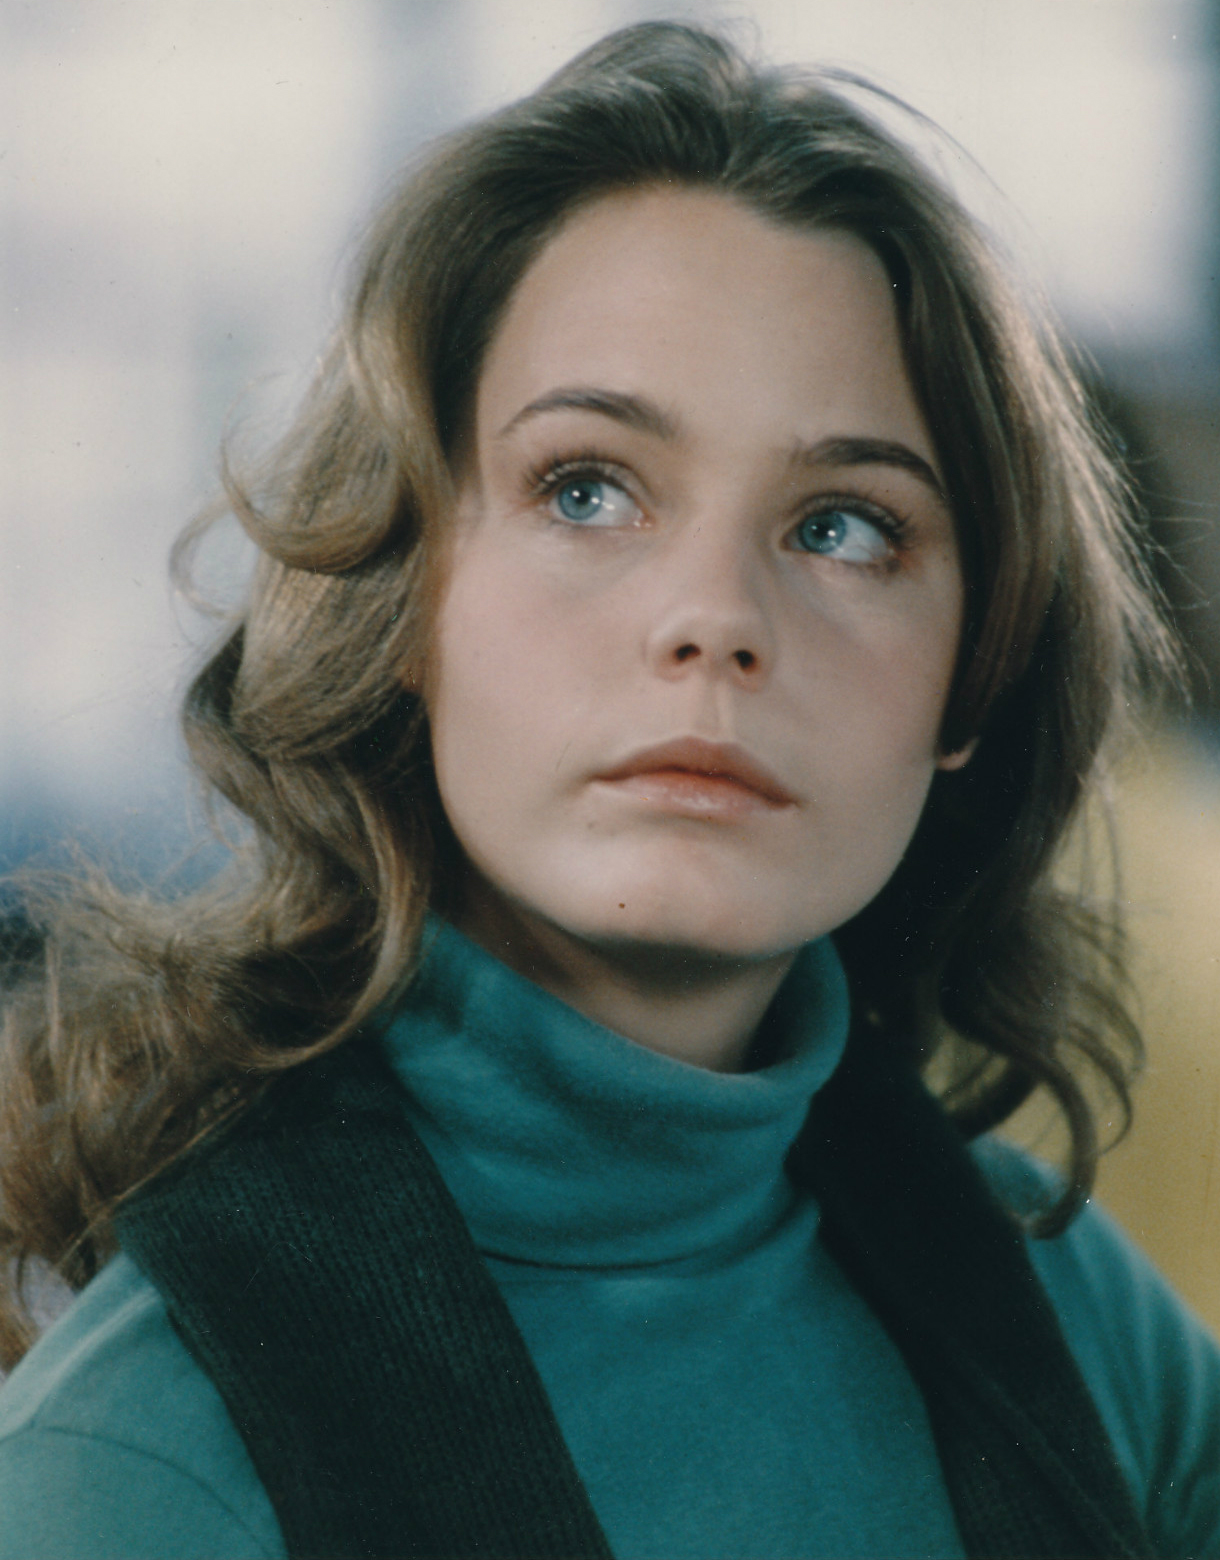 Everything Susan Dey: 4 photos of Susan Dey from First Love